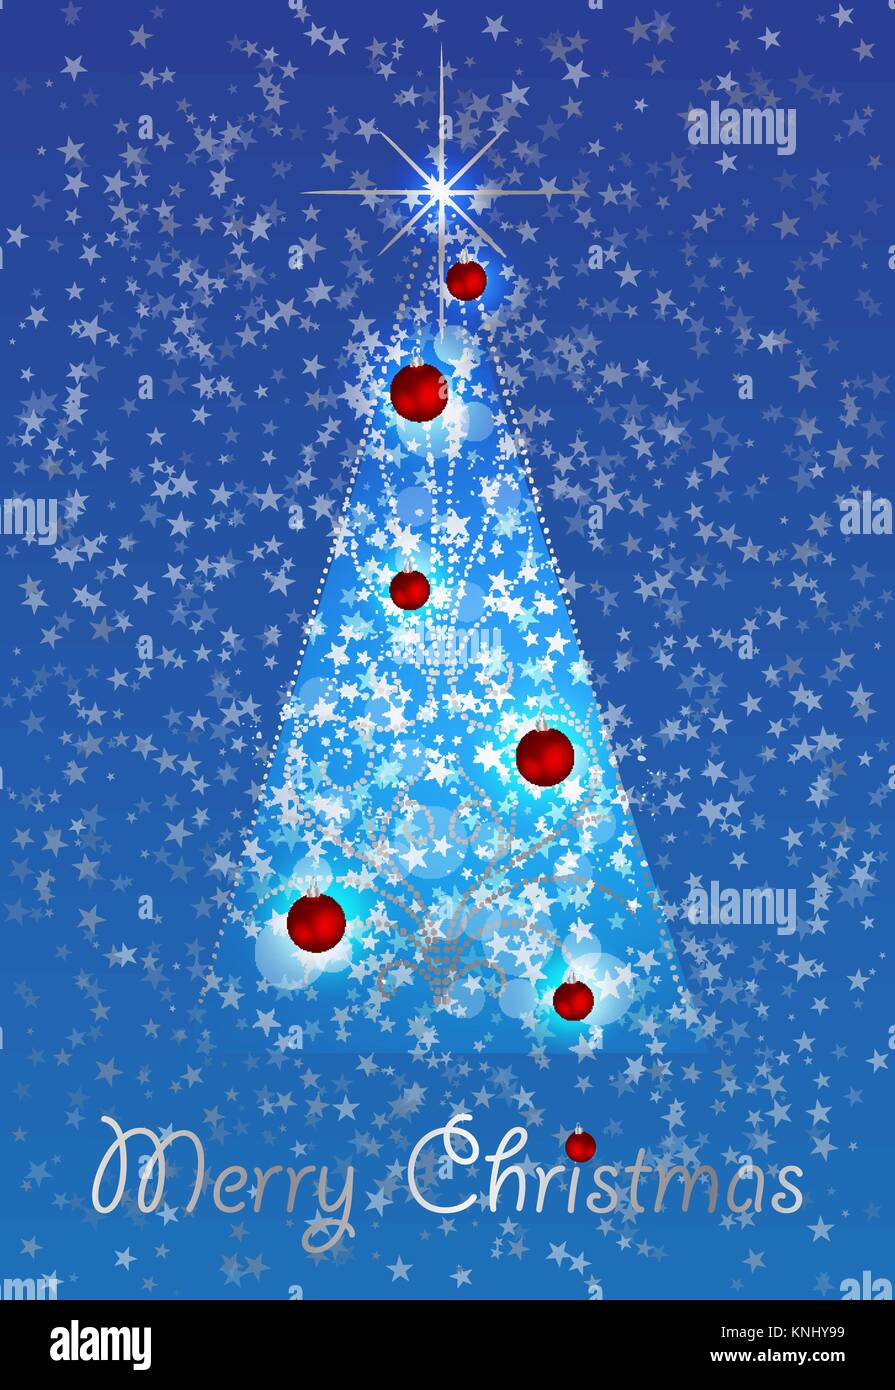 Decorated christmas tree with star, lights, decoration balls and lamps. Merry Christmas and a happy new year. Stock Vector